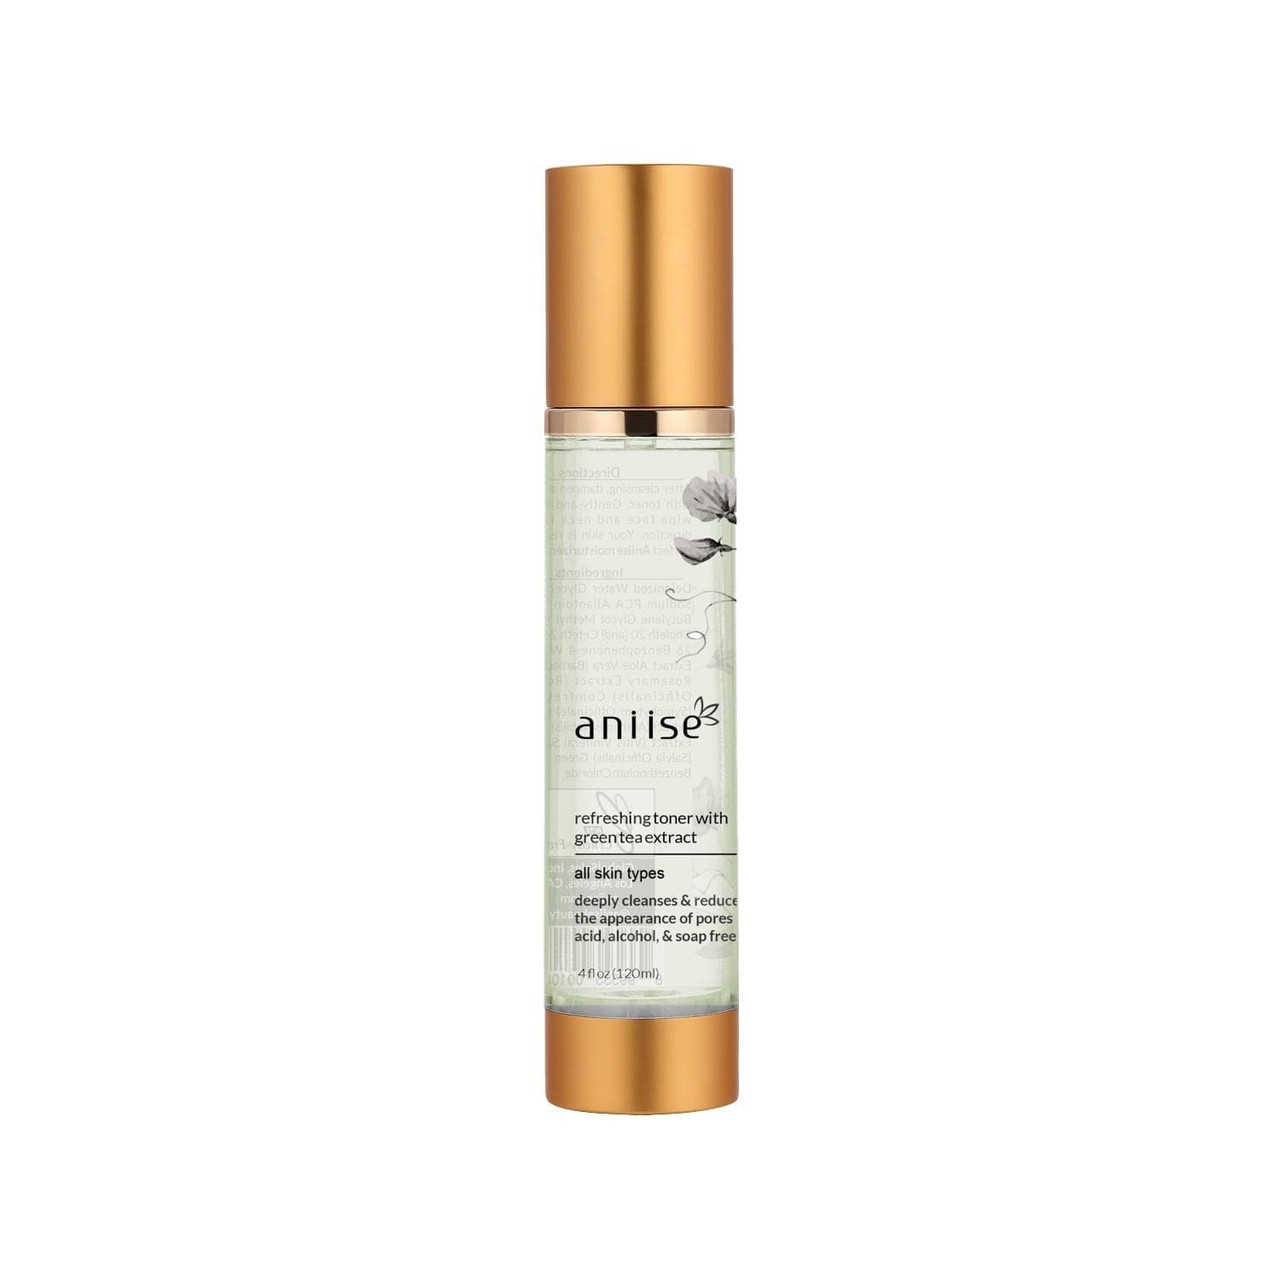 Aniise Refreshing Green Tea Extract Face Toner for Face